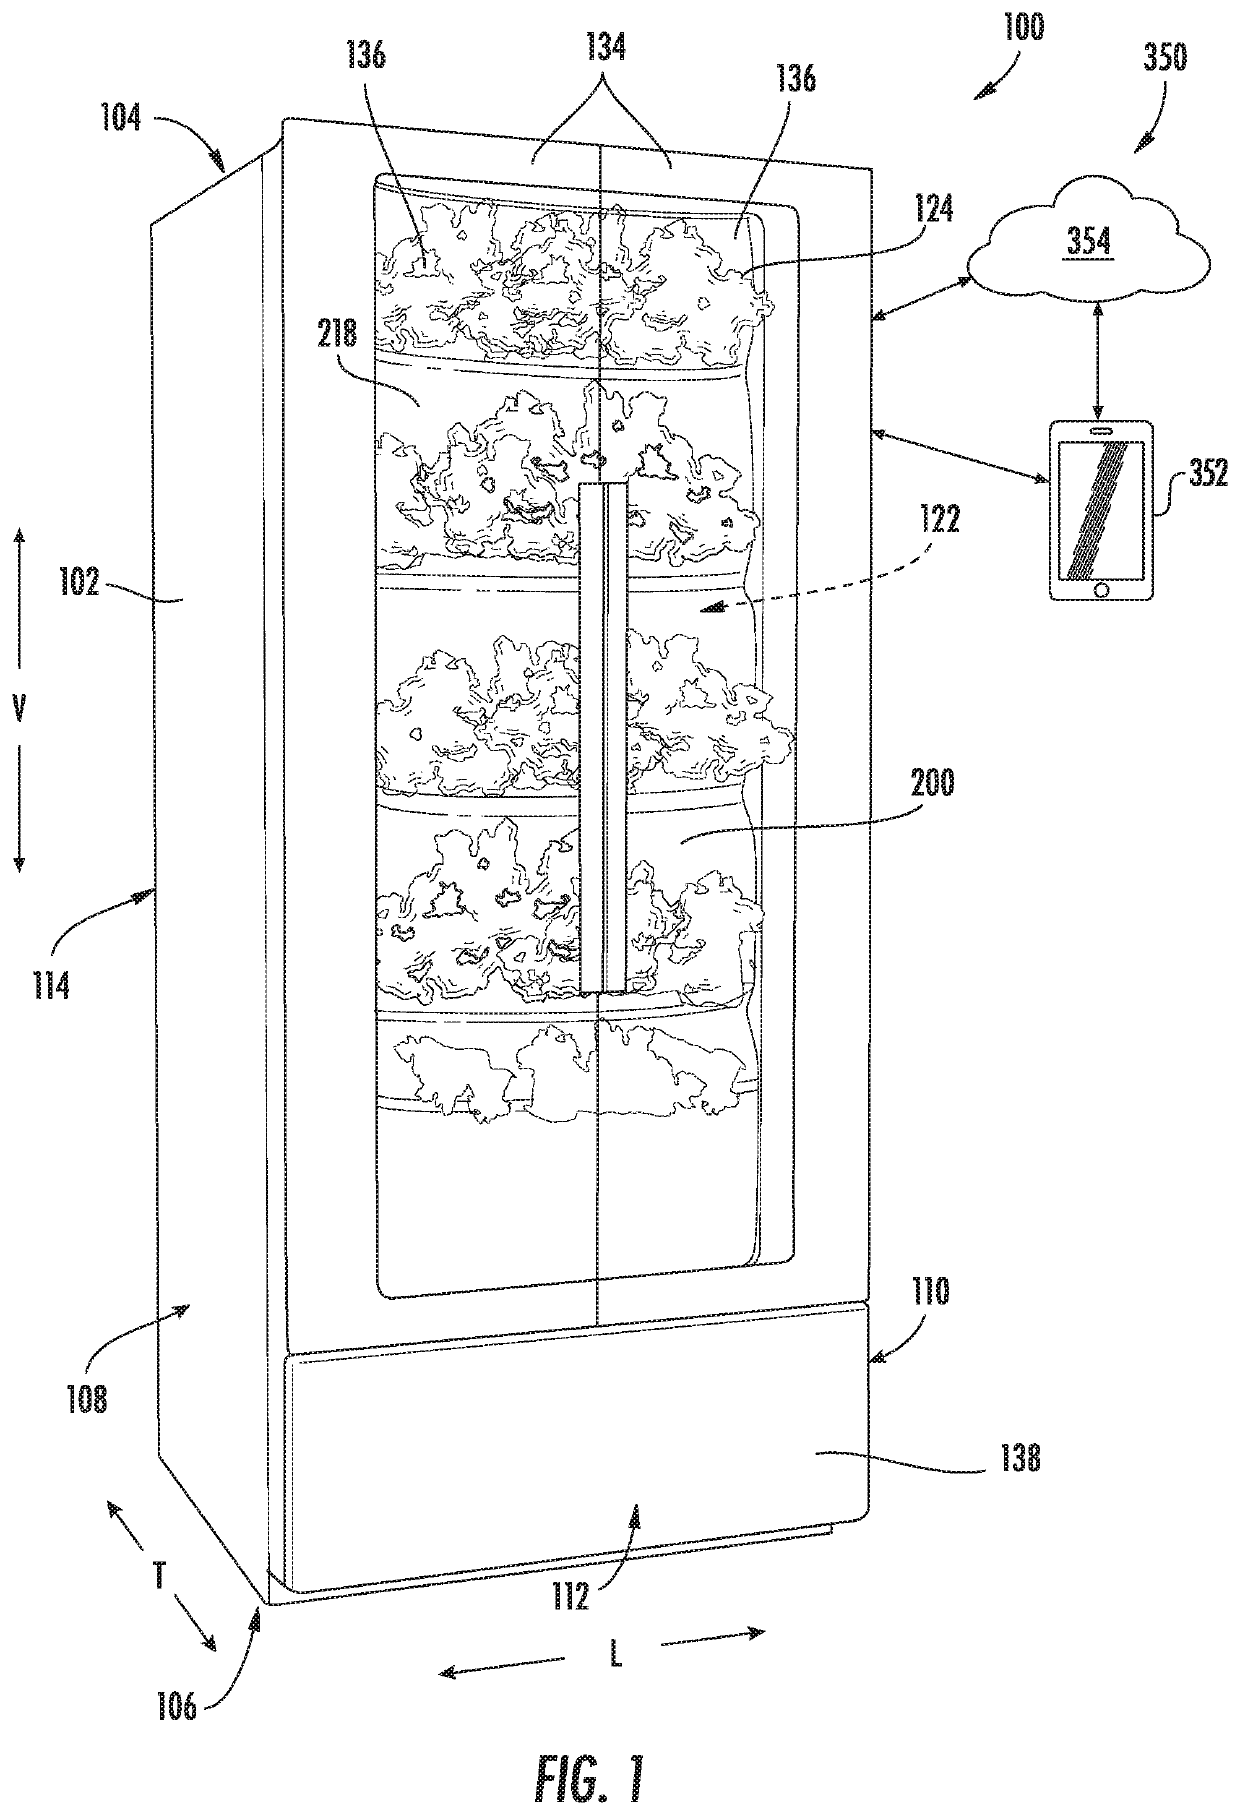 Adaptive lighting system for an indoor gardening appliance